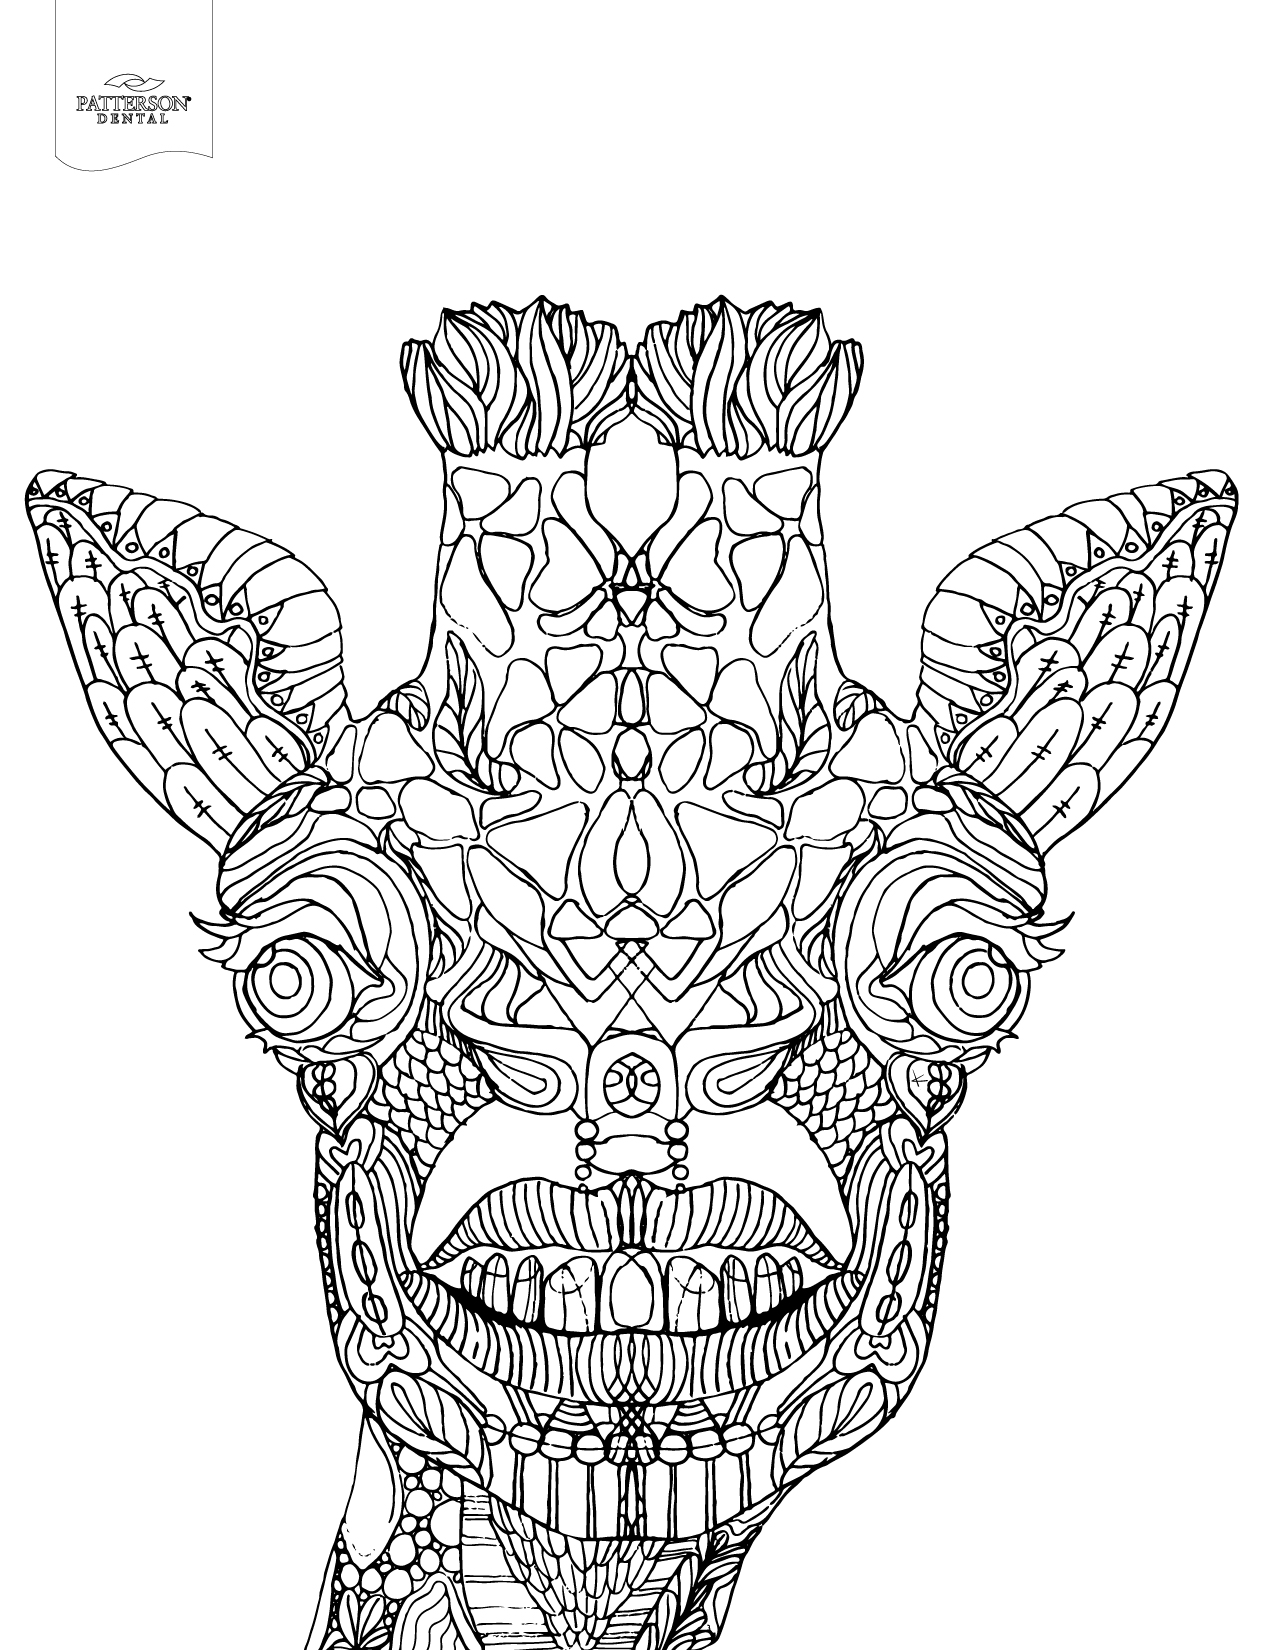 10 Toothy Adult Coloring Pages Printable - Off The Cusp